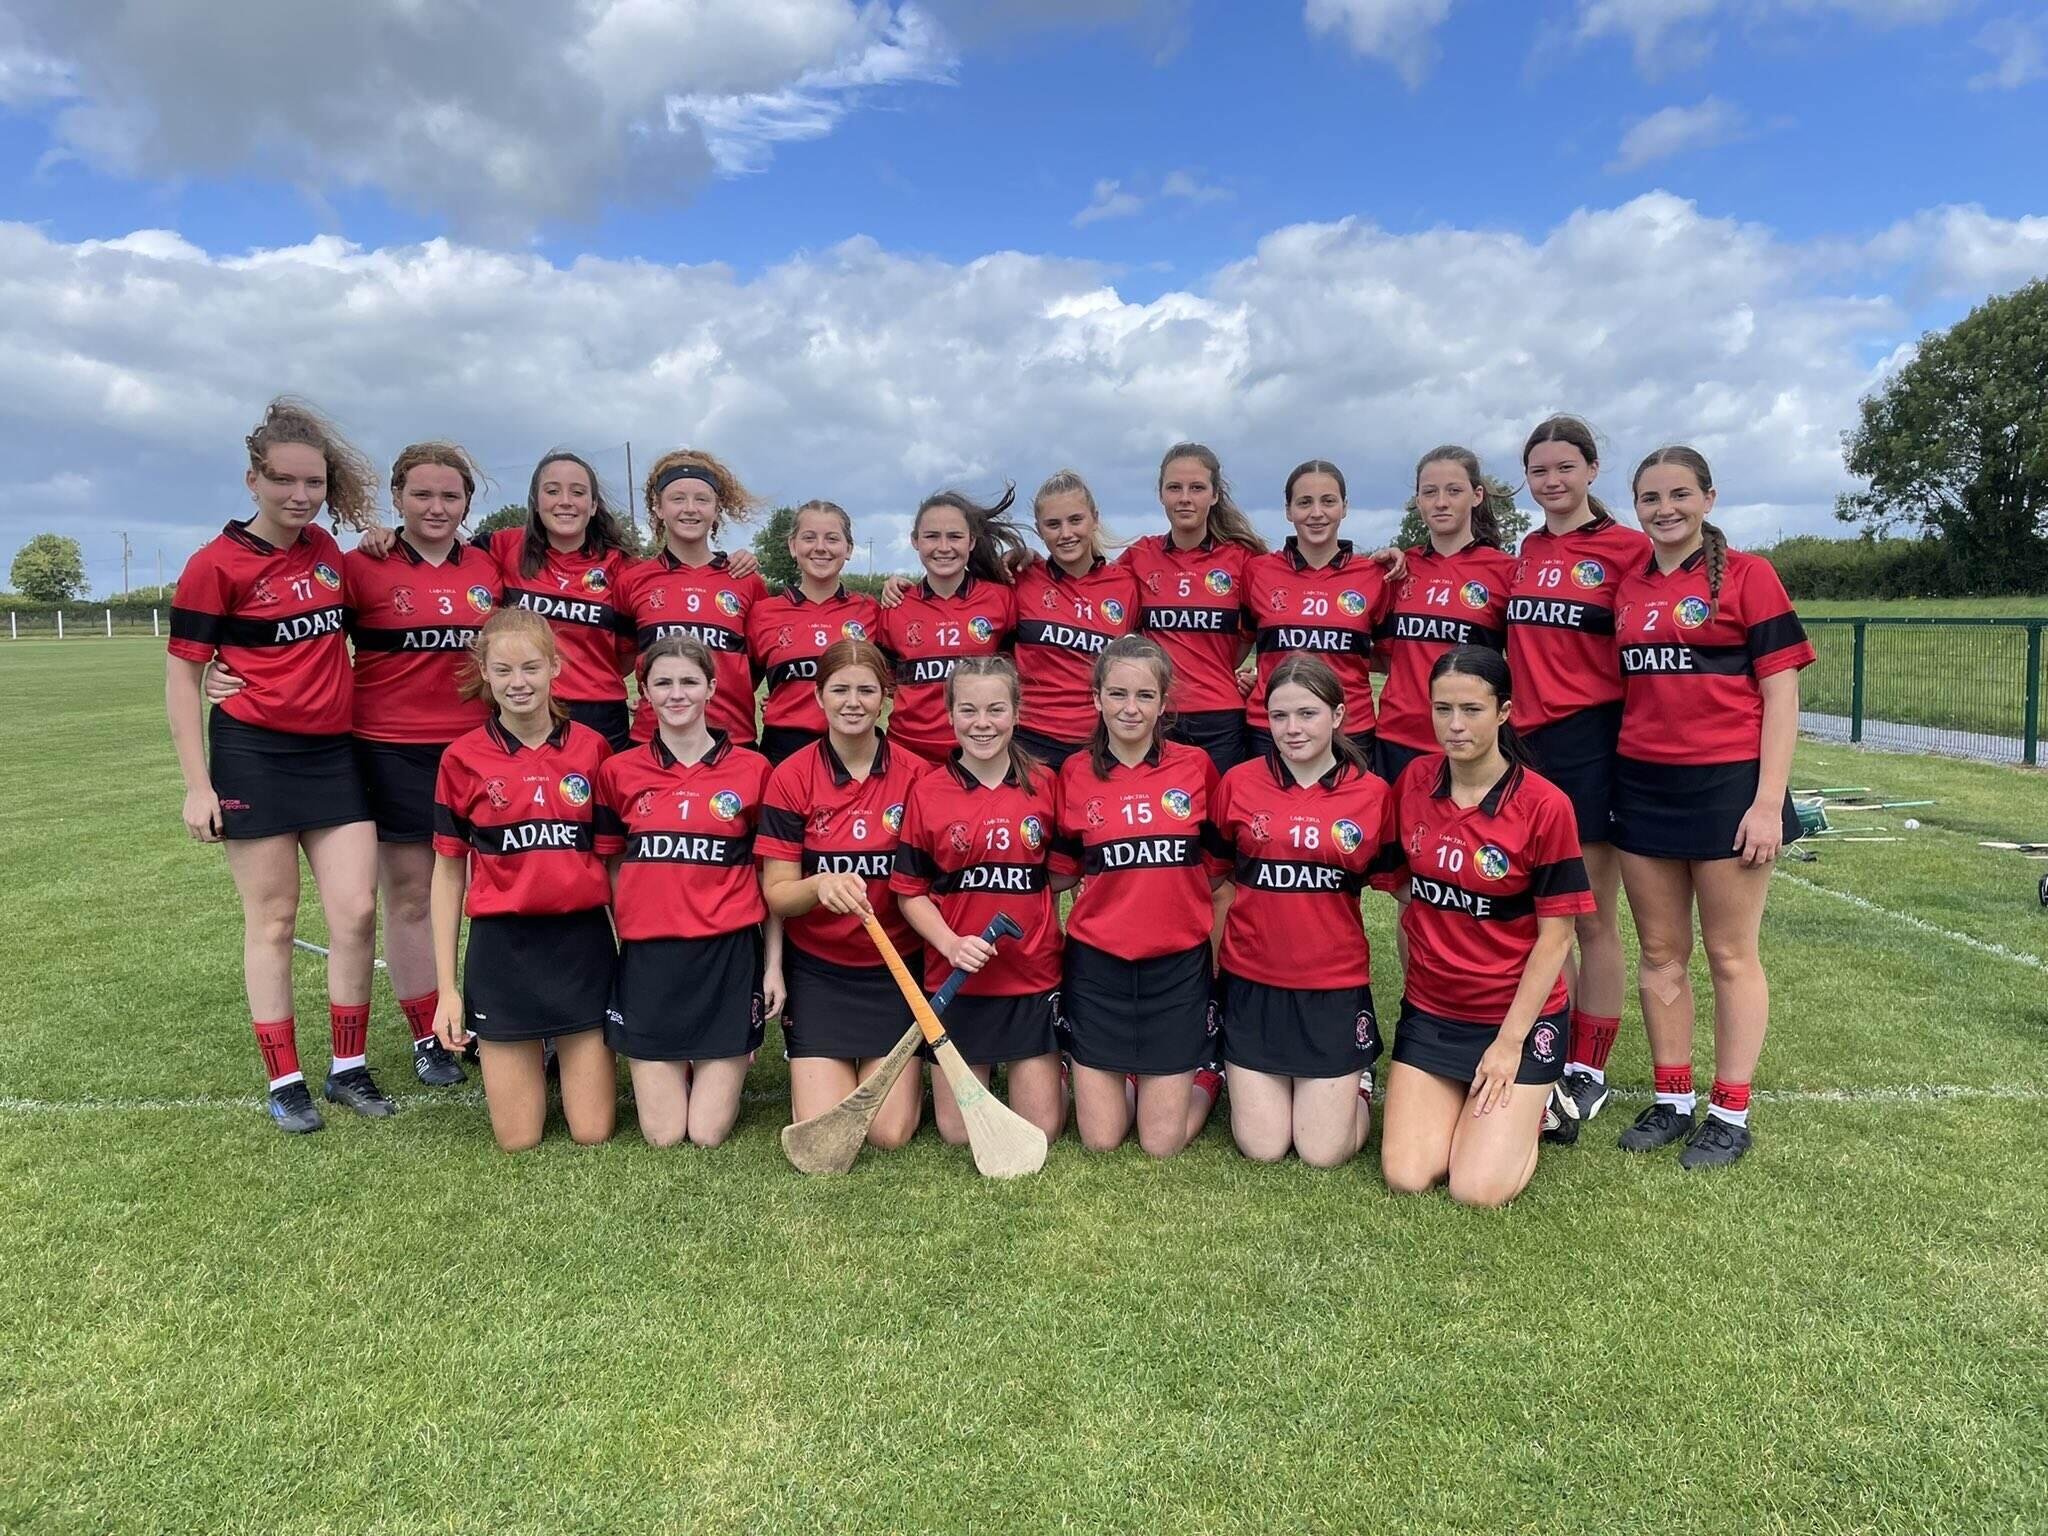 Adare Camogie Club set up GoFundMe page for future development